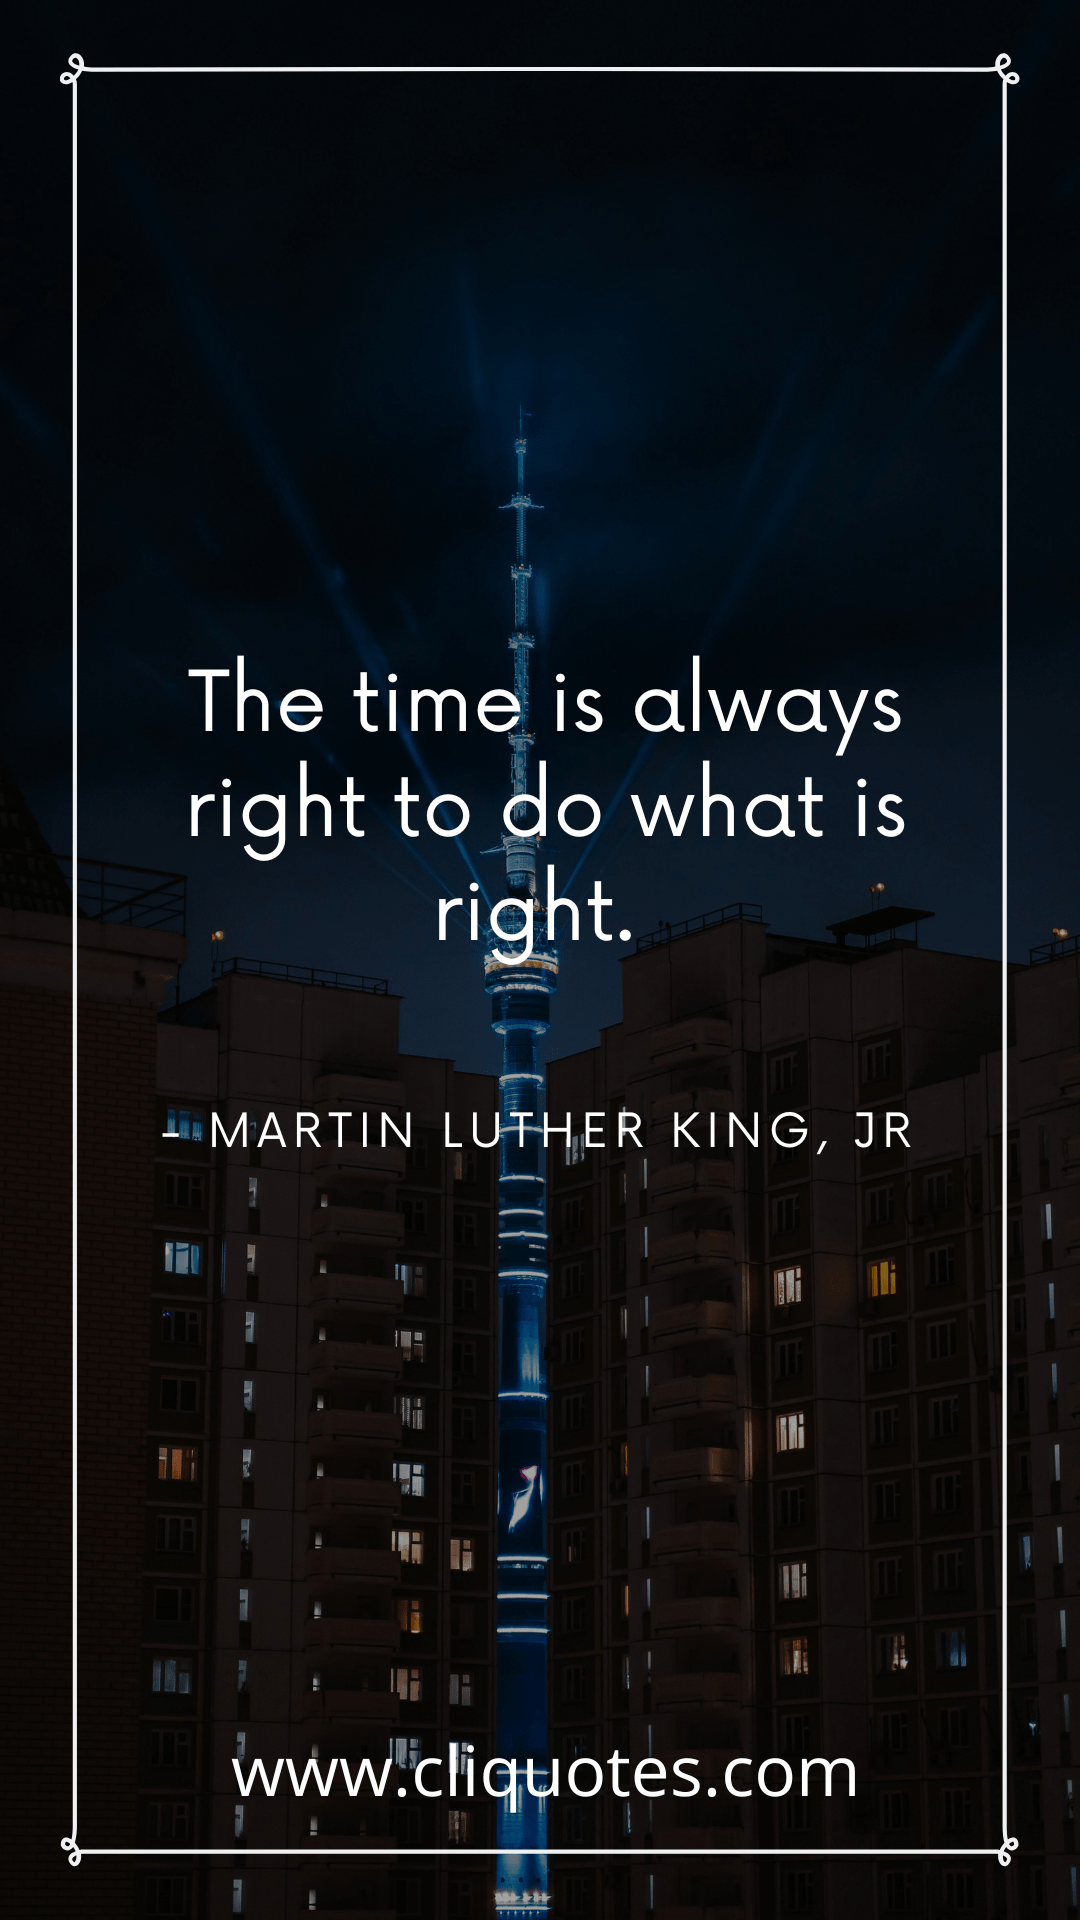 The time is always right to do what is right. - Martin Luther King, Jr